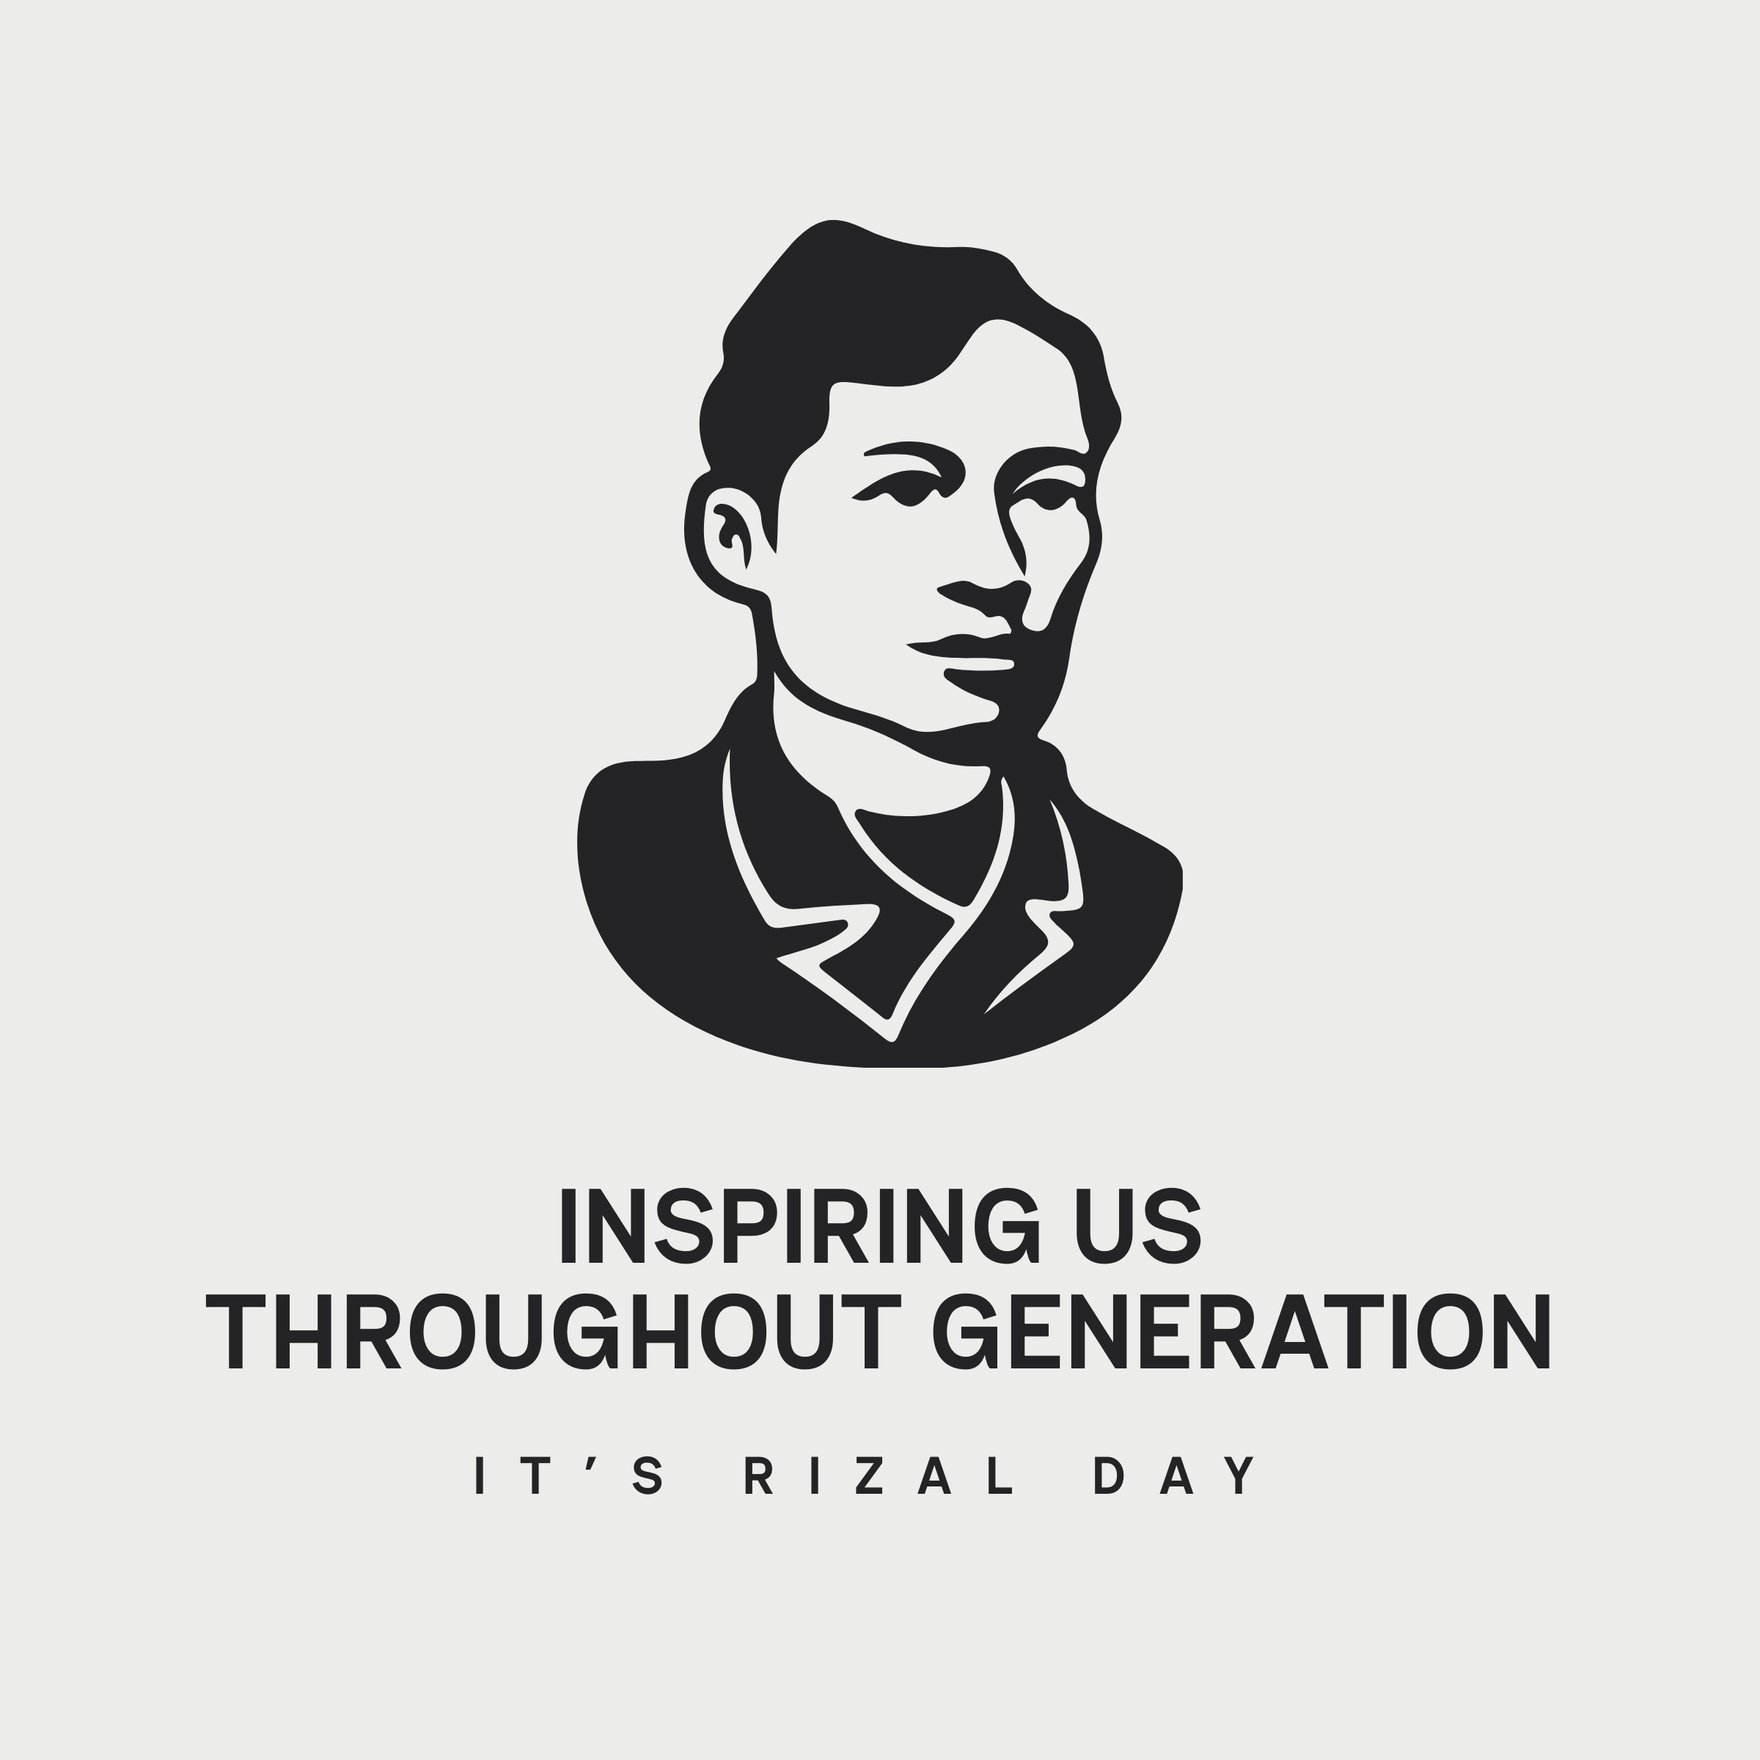 Free Rizal Day WhatsApp Post in Illustrator, PSD, EPS, SVG, PNG, JPEG